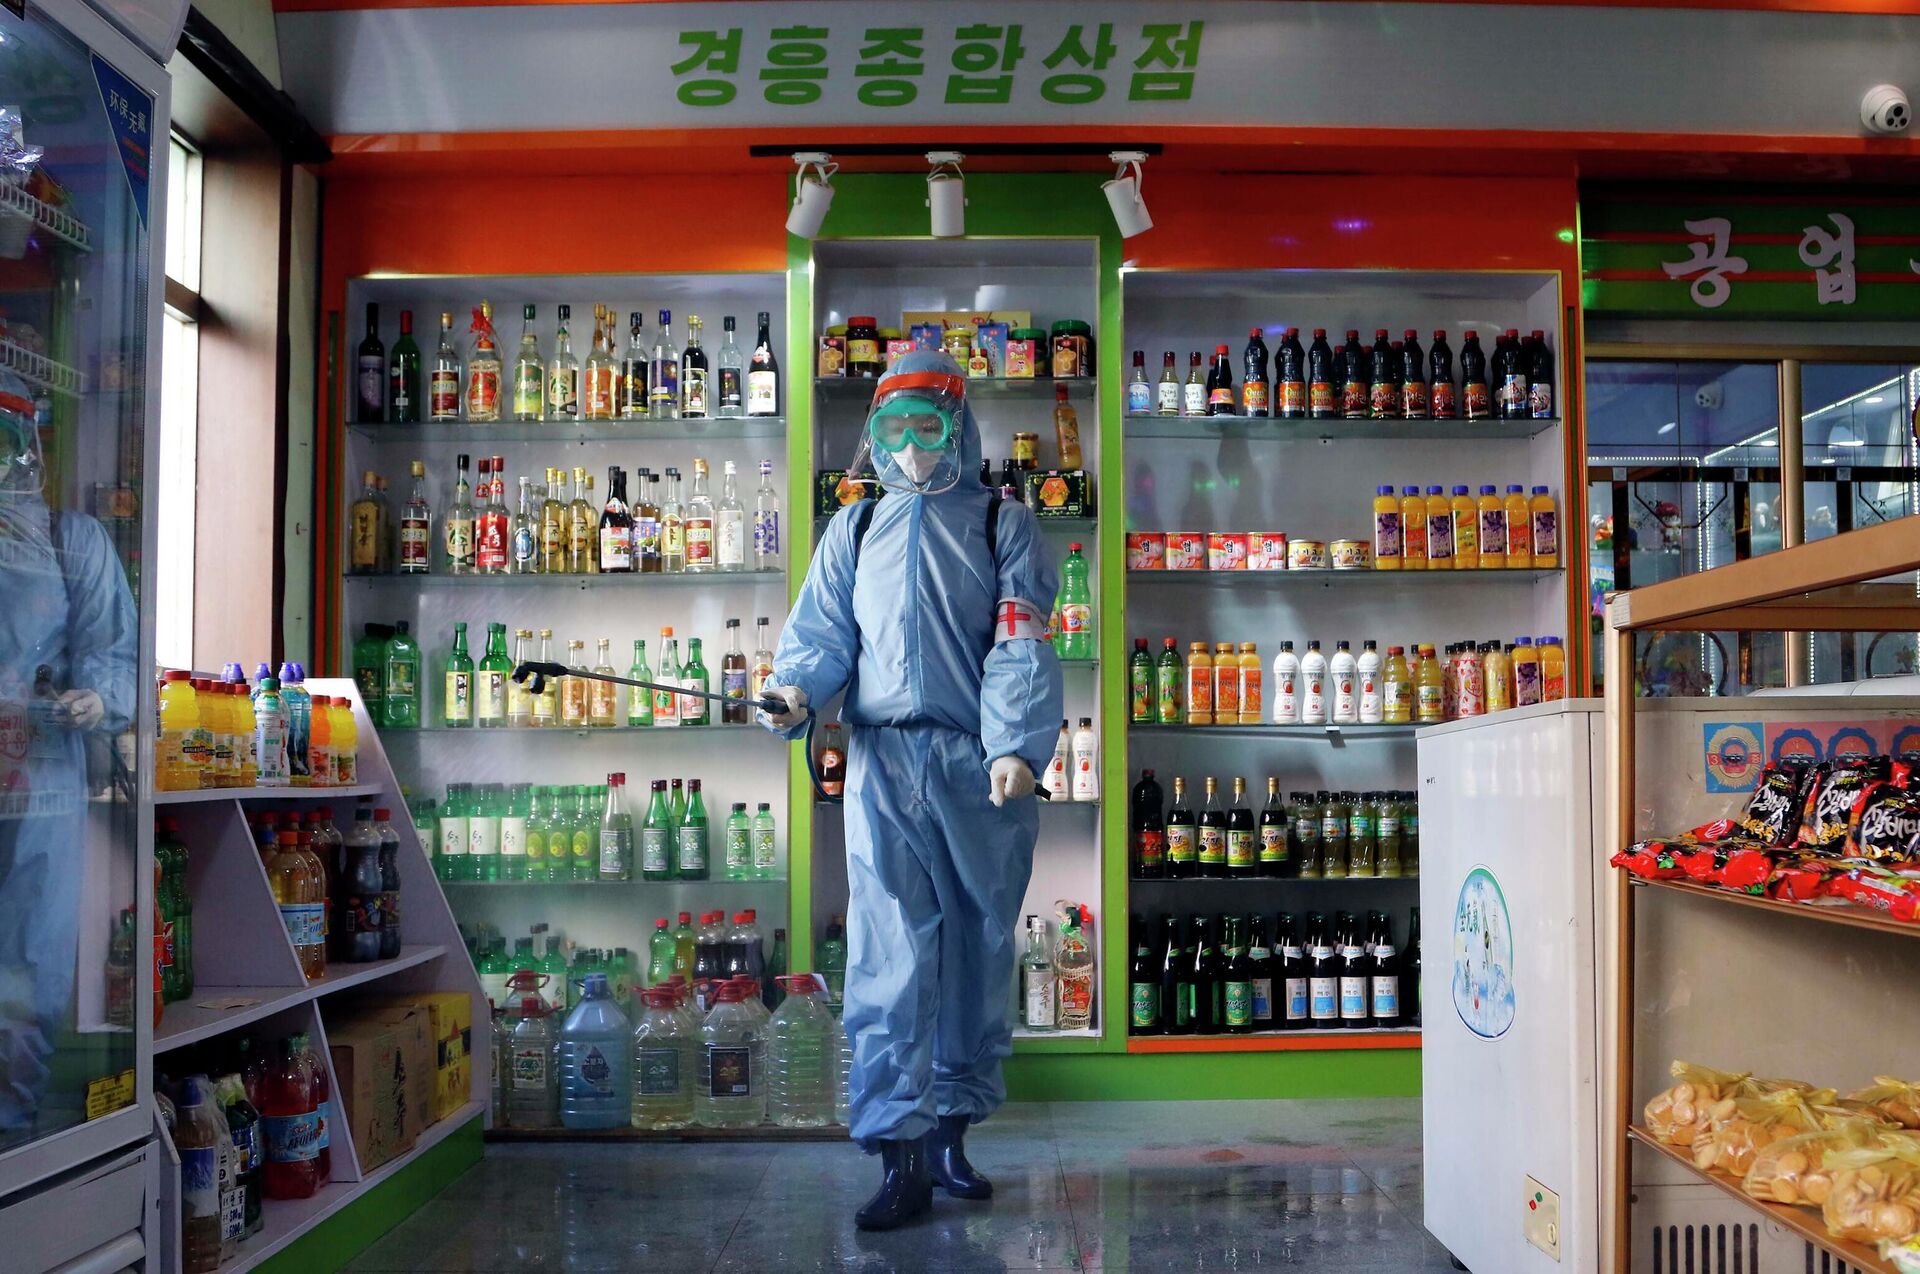 FILE - An employee of the Kyonghung Foodstuff General Store disinfects the showroom in Pyongyang, North Korea, Wednesday, Nov. 10, 2021. Before acknowledging domestic COVID-19 cases, Thursday, May 12, 2022, North Korea spent 2 1/2 years rejecting outside offers of vaccines and steadfastly claiming that its superior socialist system was protecting its 26 million people from “a malicious virus” that had killed millions around the world. - Sputnik International, 1920, 15.05.2022